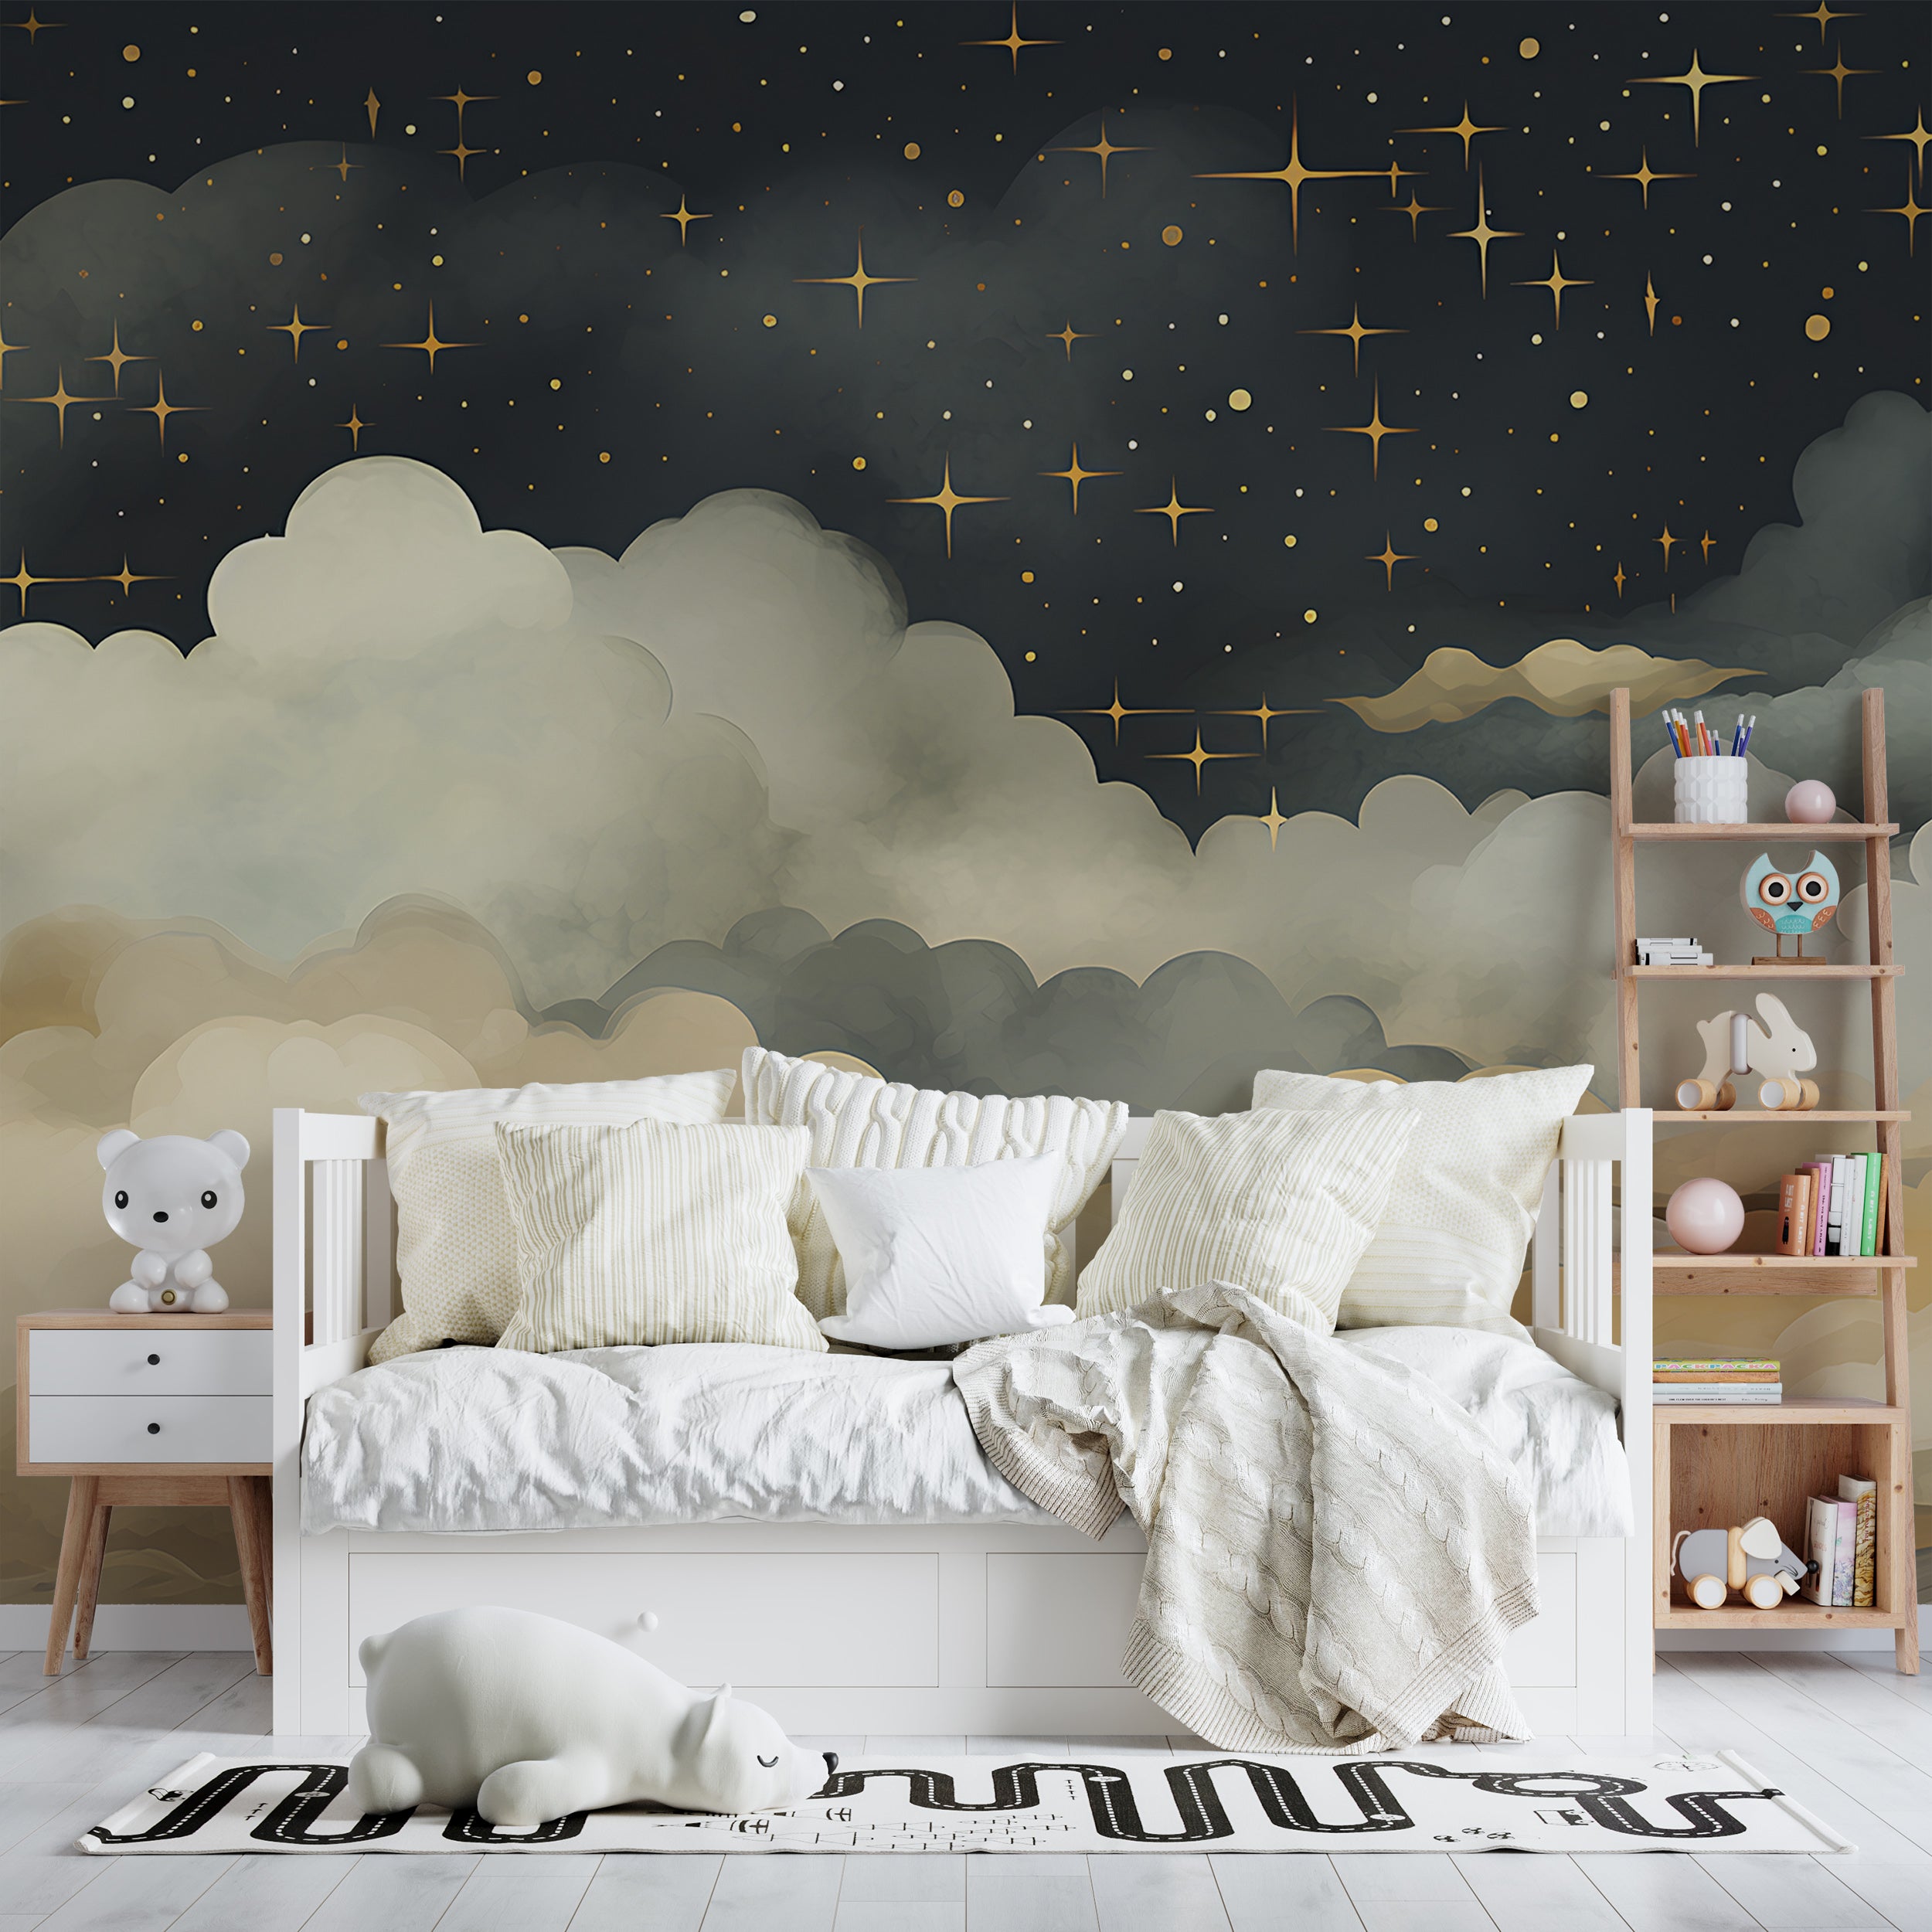 Night Sky Theme for Children's Space